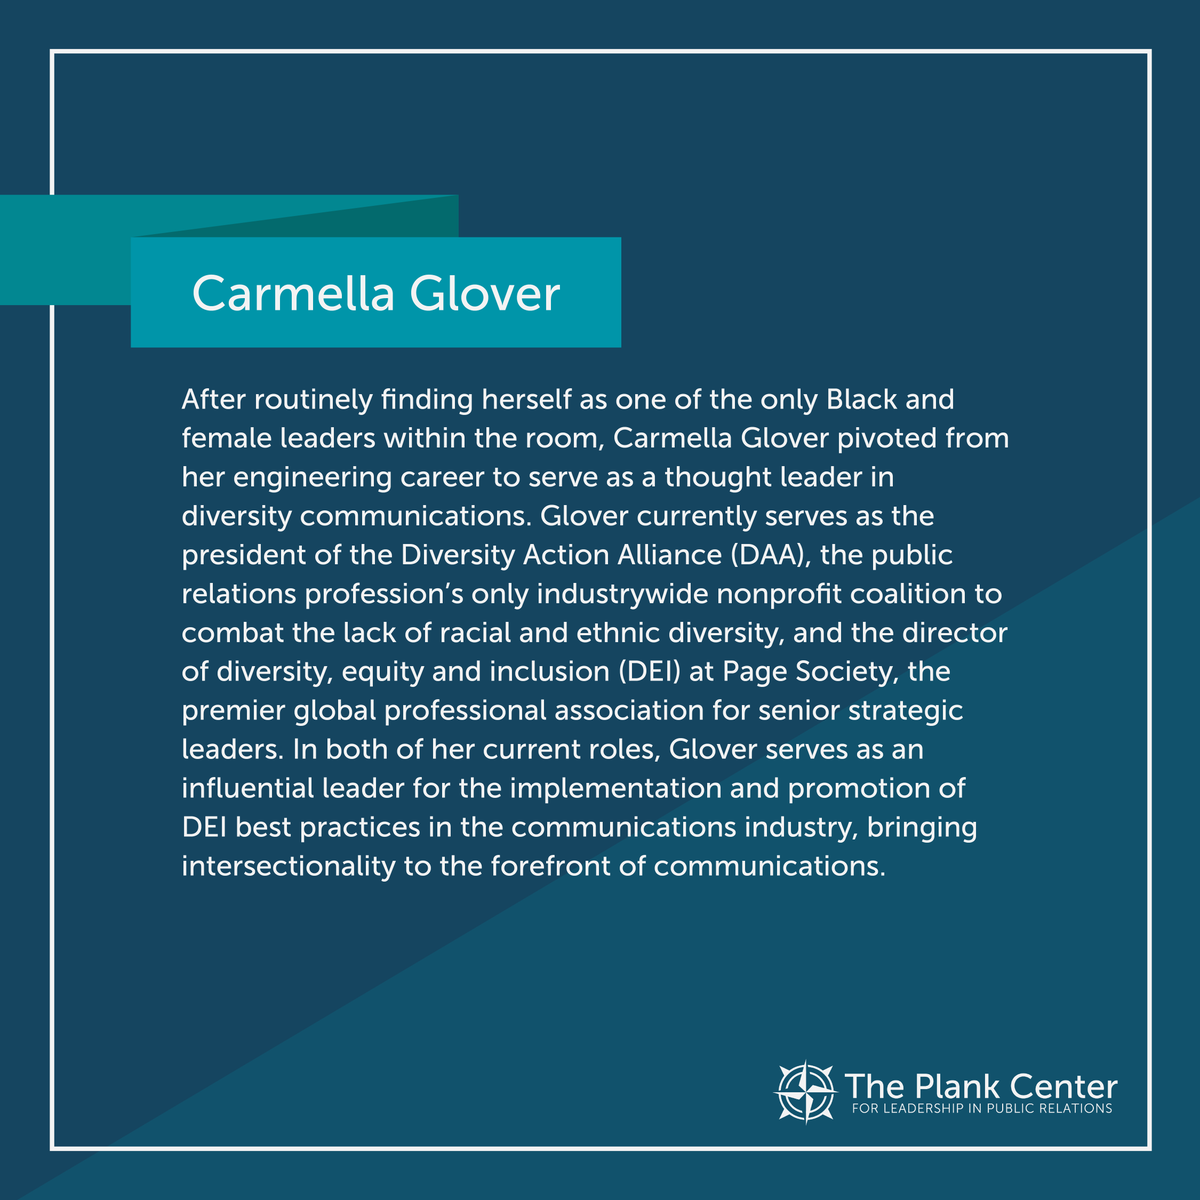 With February coming to an end, our final Black leader spotlight highlights innovative PR professional and Plank Partner Carmella Glover. We encourage you to recognize the impact of Black PR leaders year-round, and you can start by tagging one of them. #plankcenterPR #PRhistory